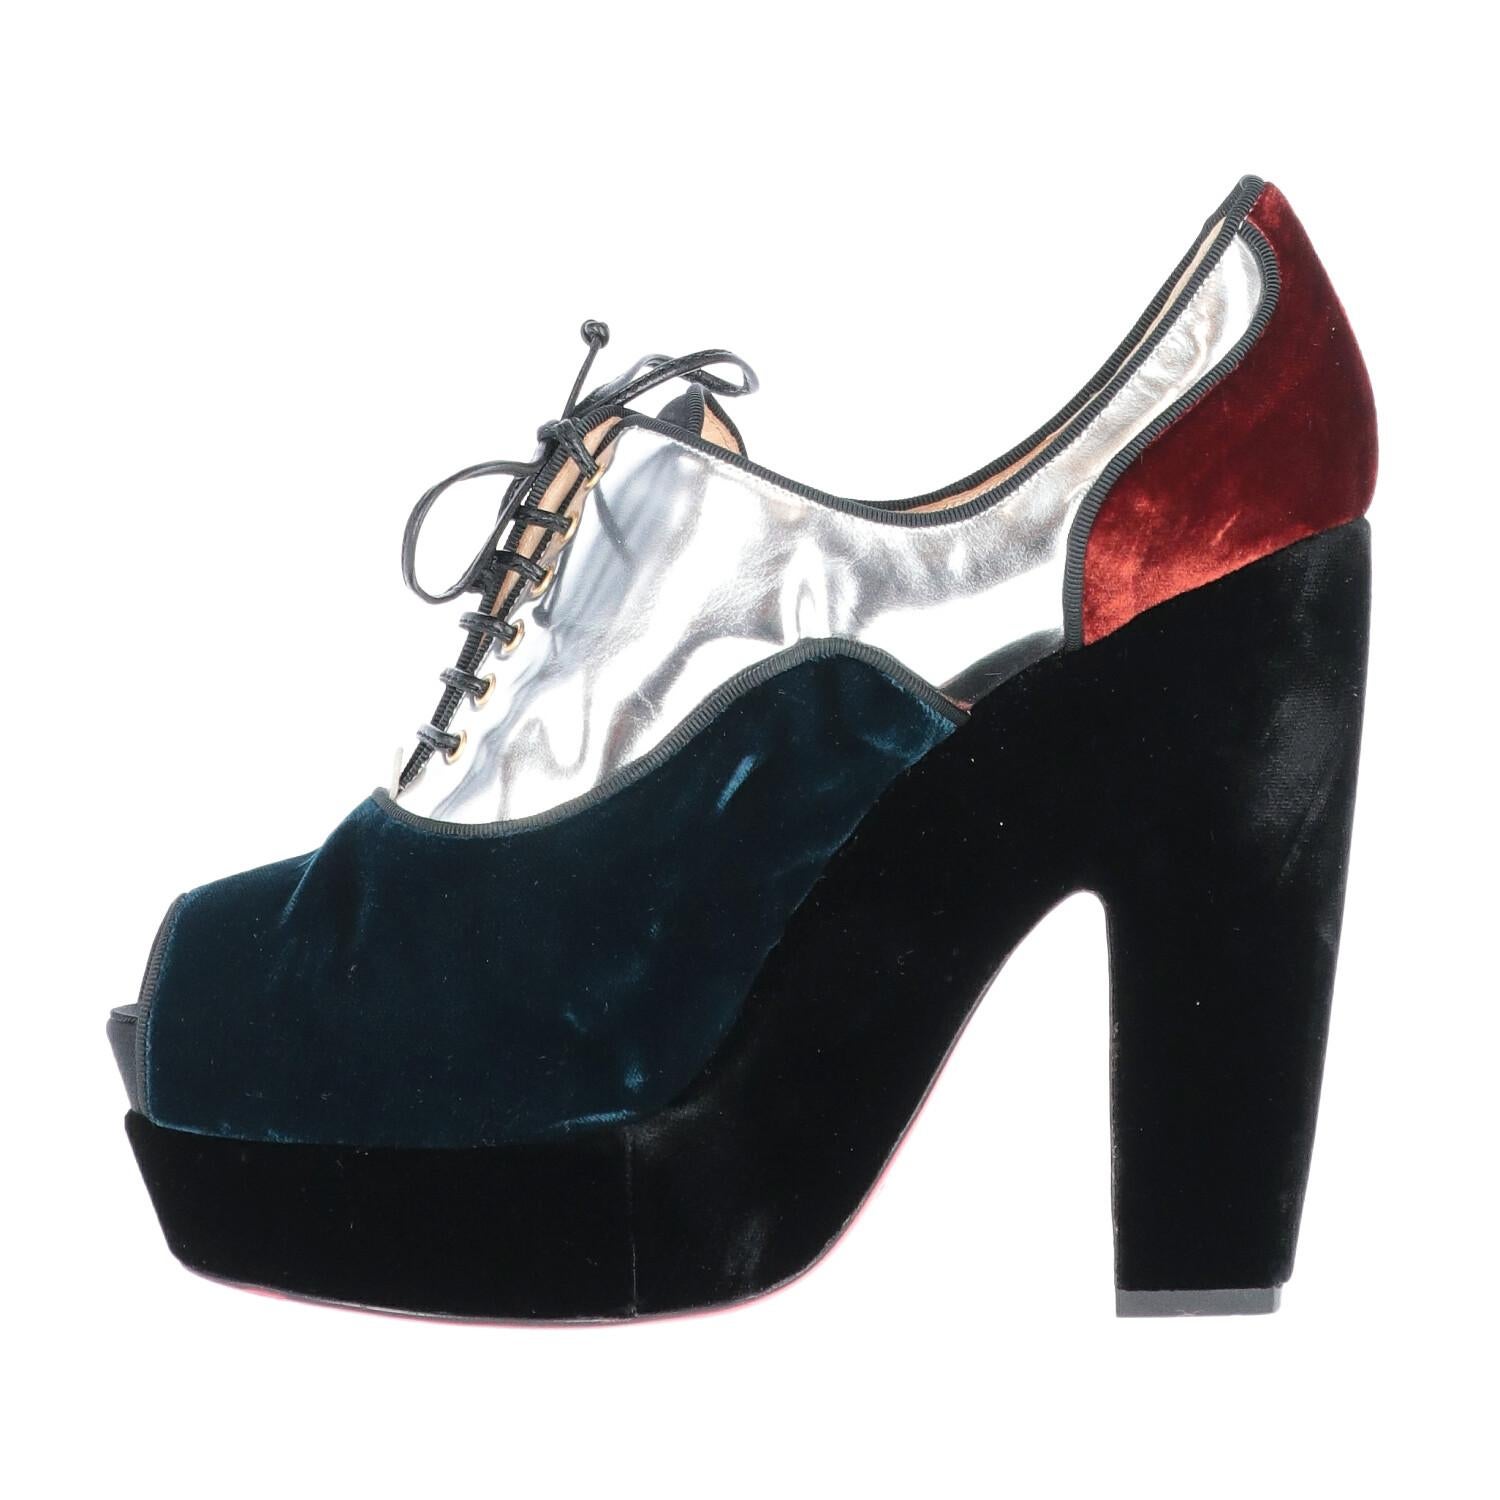 A.N.G.E.L.O. Vintage - Italy
Christian Louboutin colorblock velvet and shiny leather ankle boots. Model with open toe, closure with front laces and wide high heel and platform.

The product has slight signs of wear as shown in the pictures.

Years: